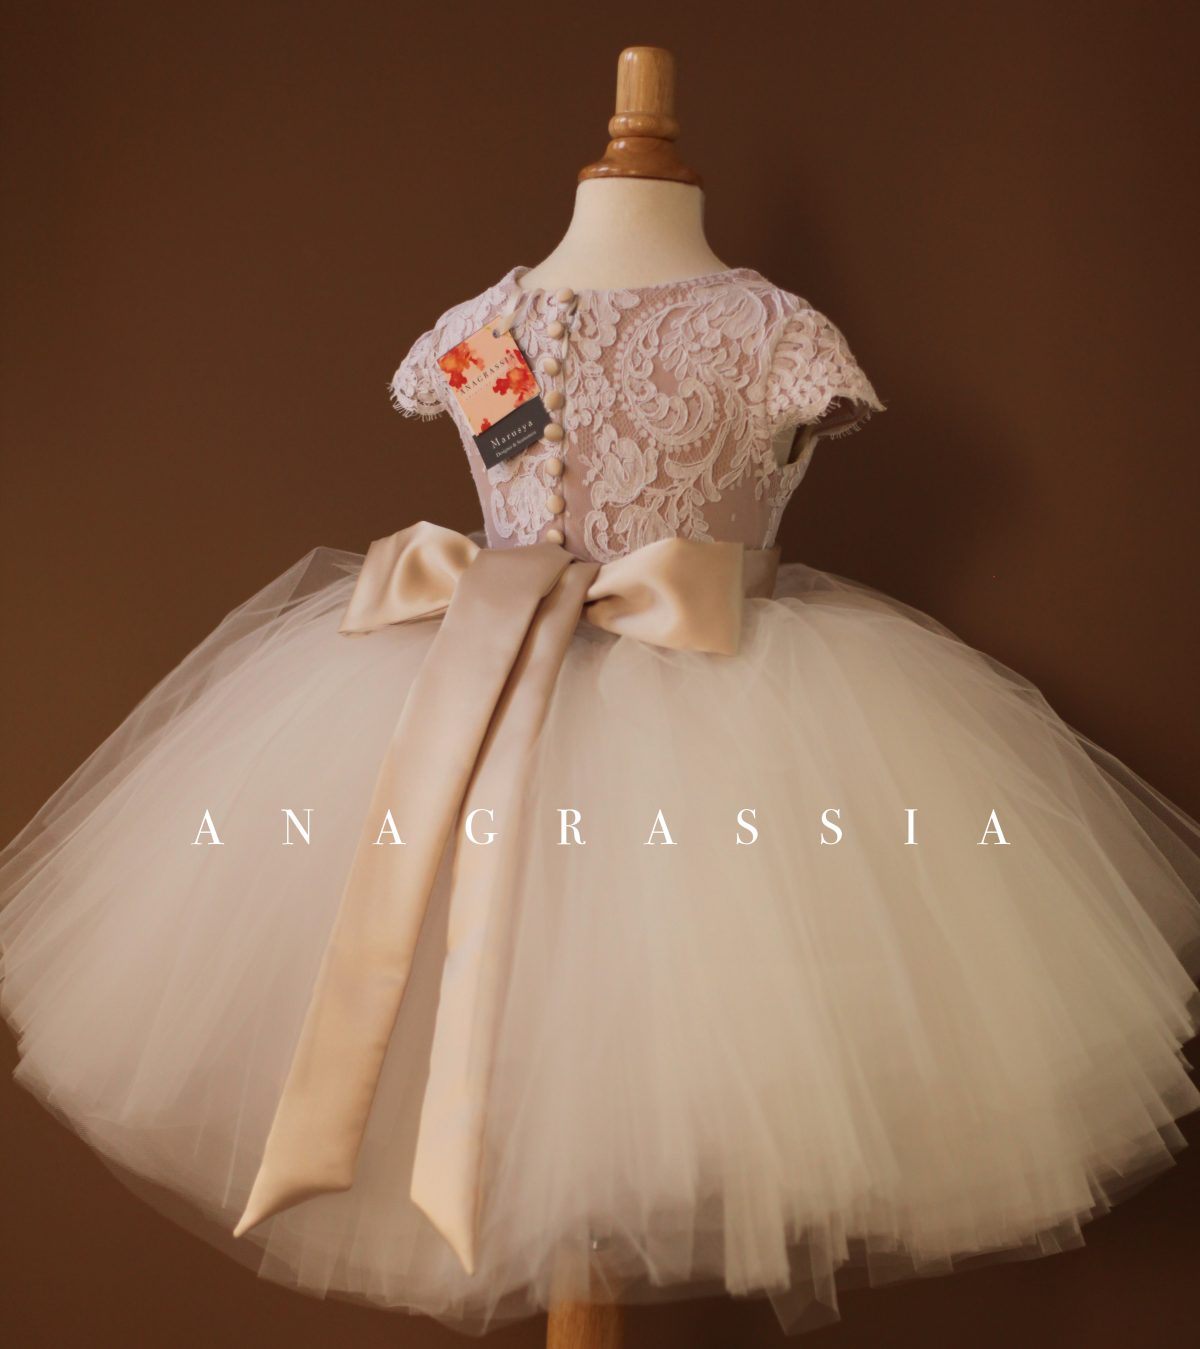 White Embroidered Communion flower girl dress skirt lace leotard hand custom satin buttons seamstress couture bespoke gold ivory wedding floral tulle bodysuit